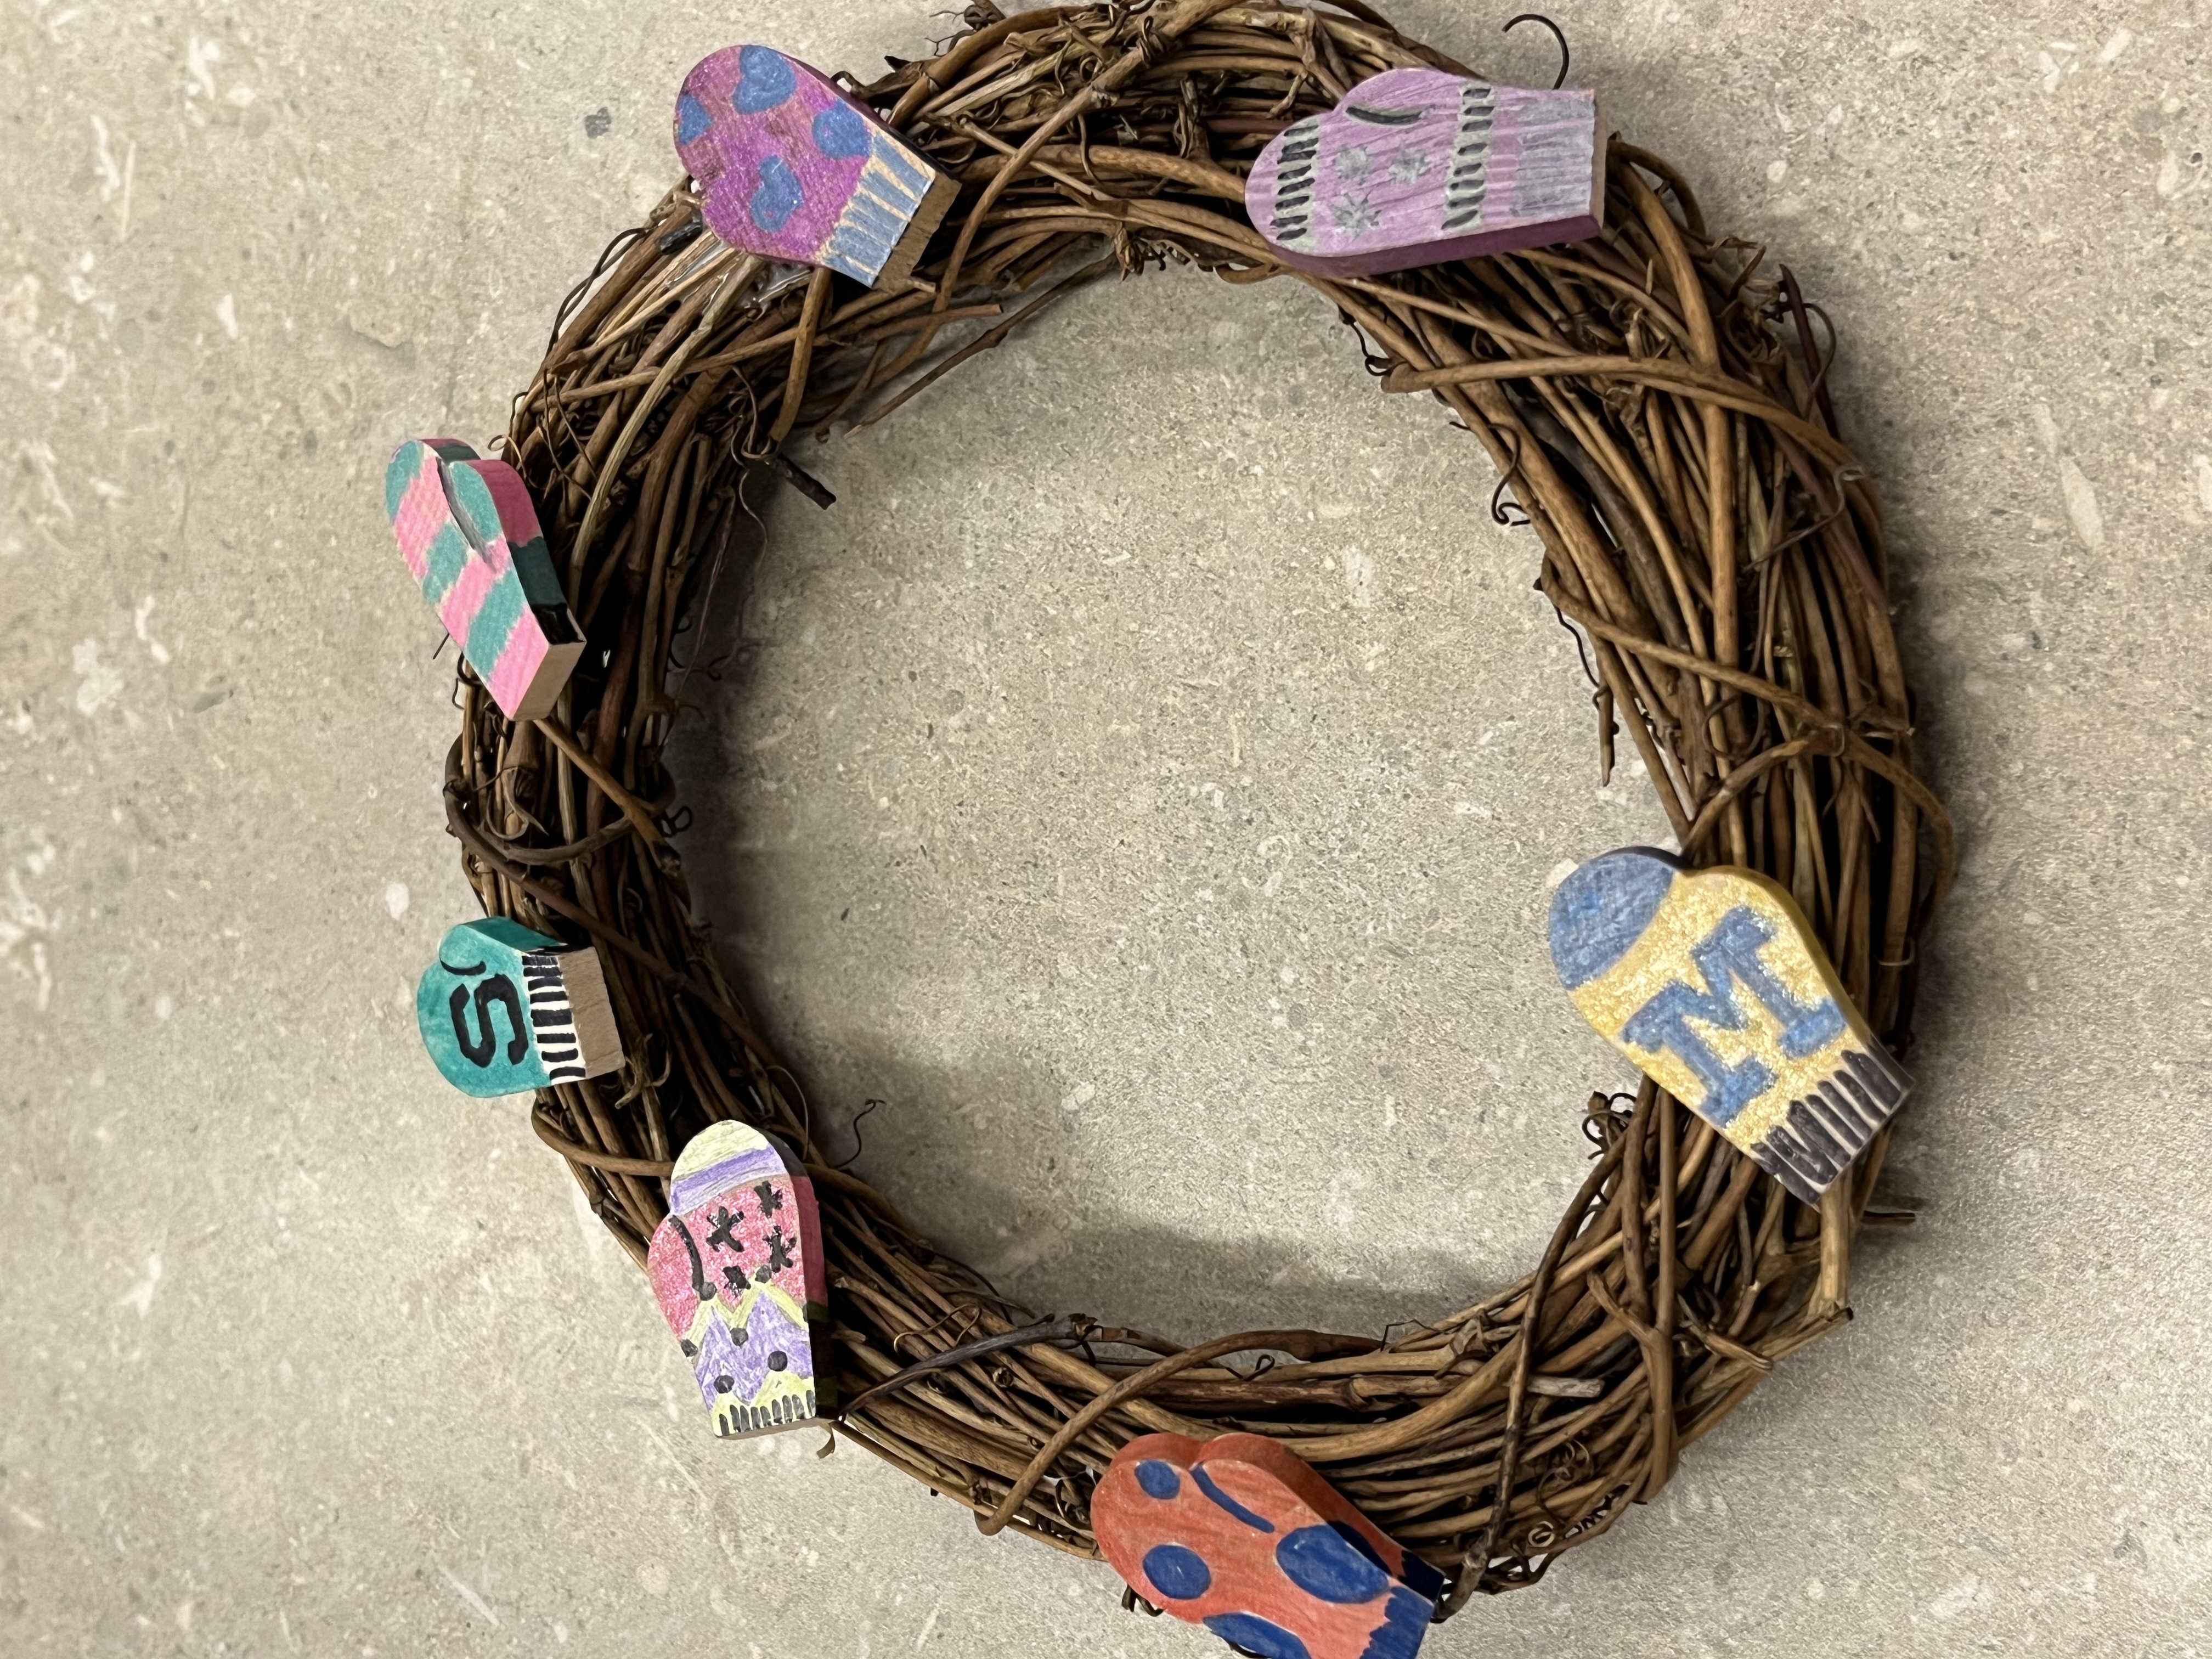 A wreath decorated with wooden decorated mittens